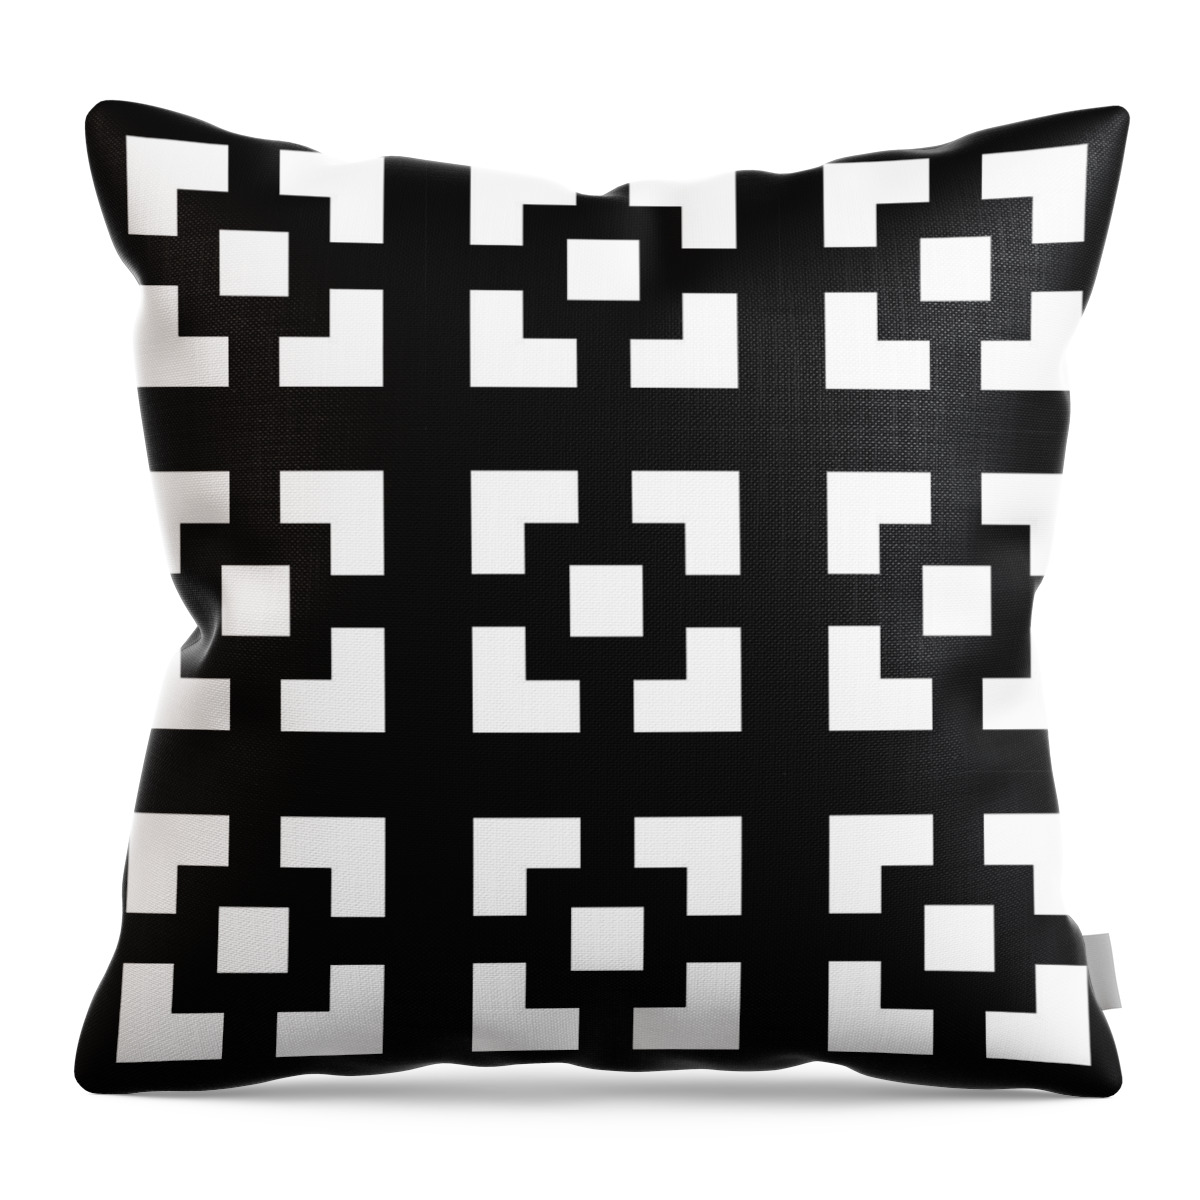 Squares Multiview Throw Pillow featuring the digital art Squares Multiview by Chuck Staley